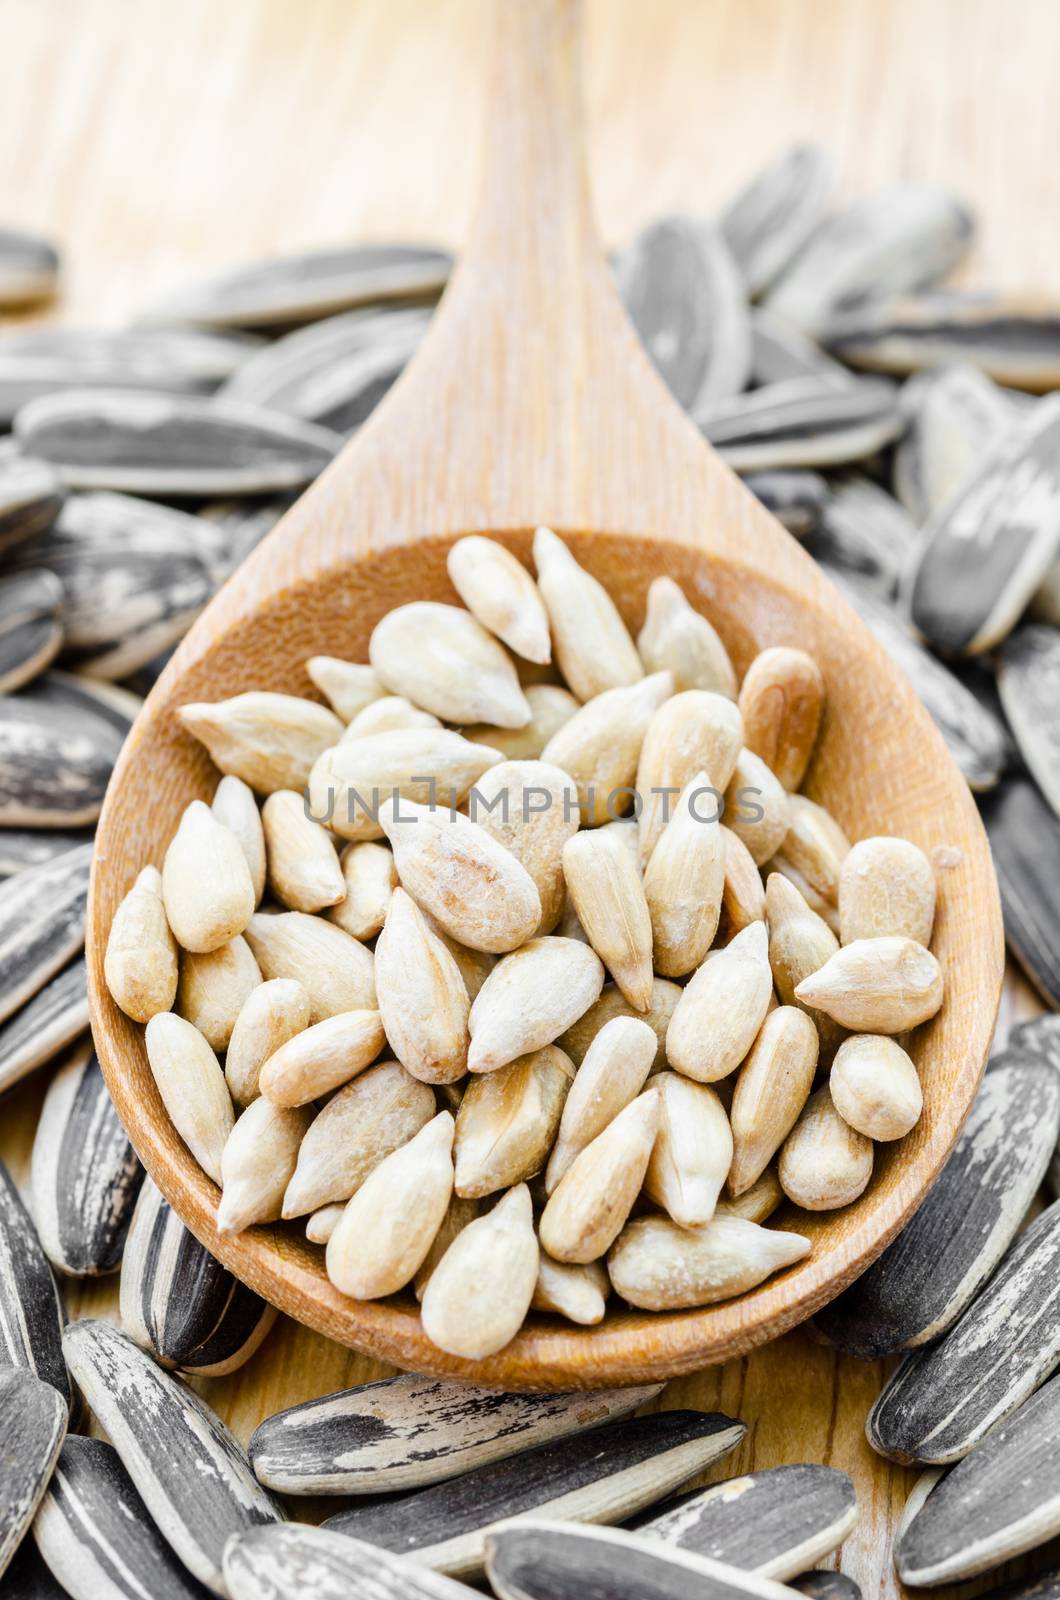 sunflower seeds in wooden spoon. by Gamjai